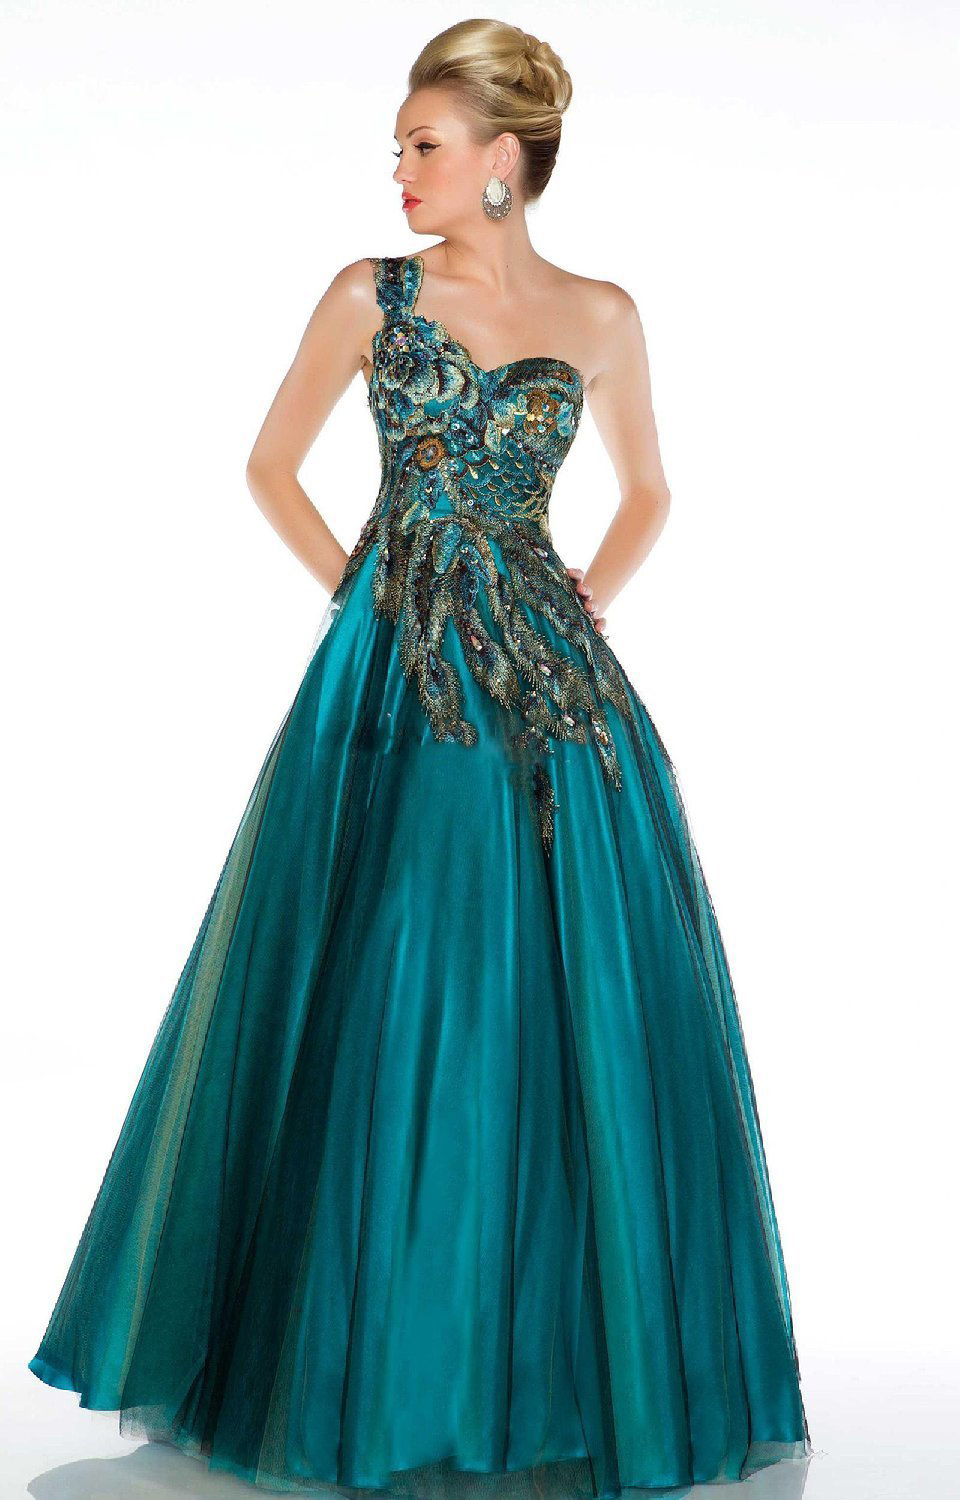 Full Length Peacock Embroidered Party Ball Homecoming Prom Dresses Long ...